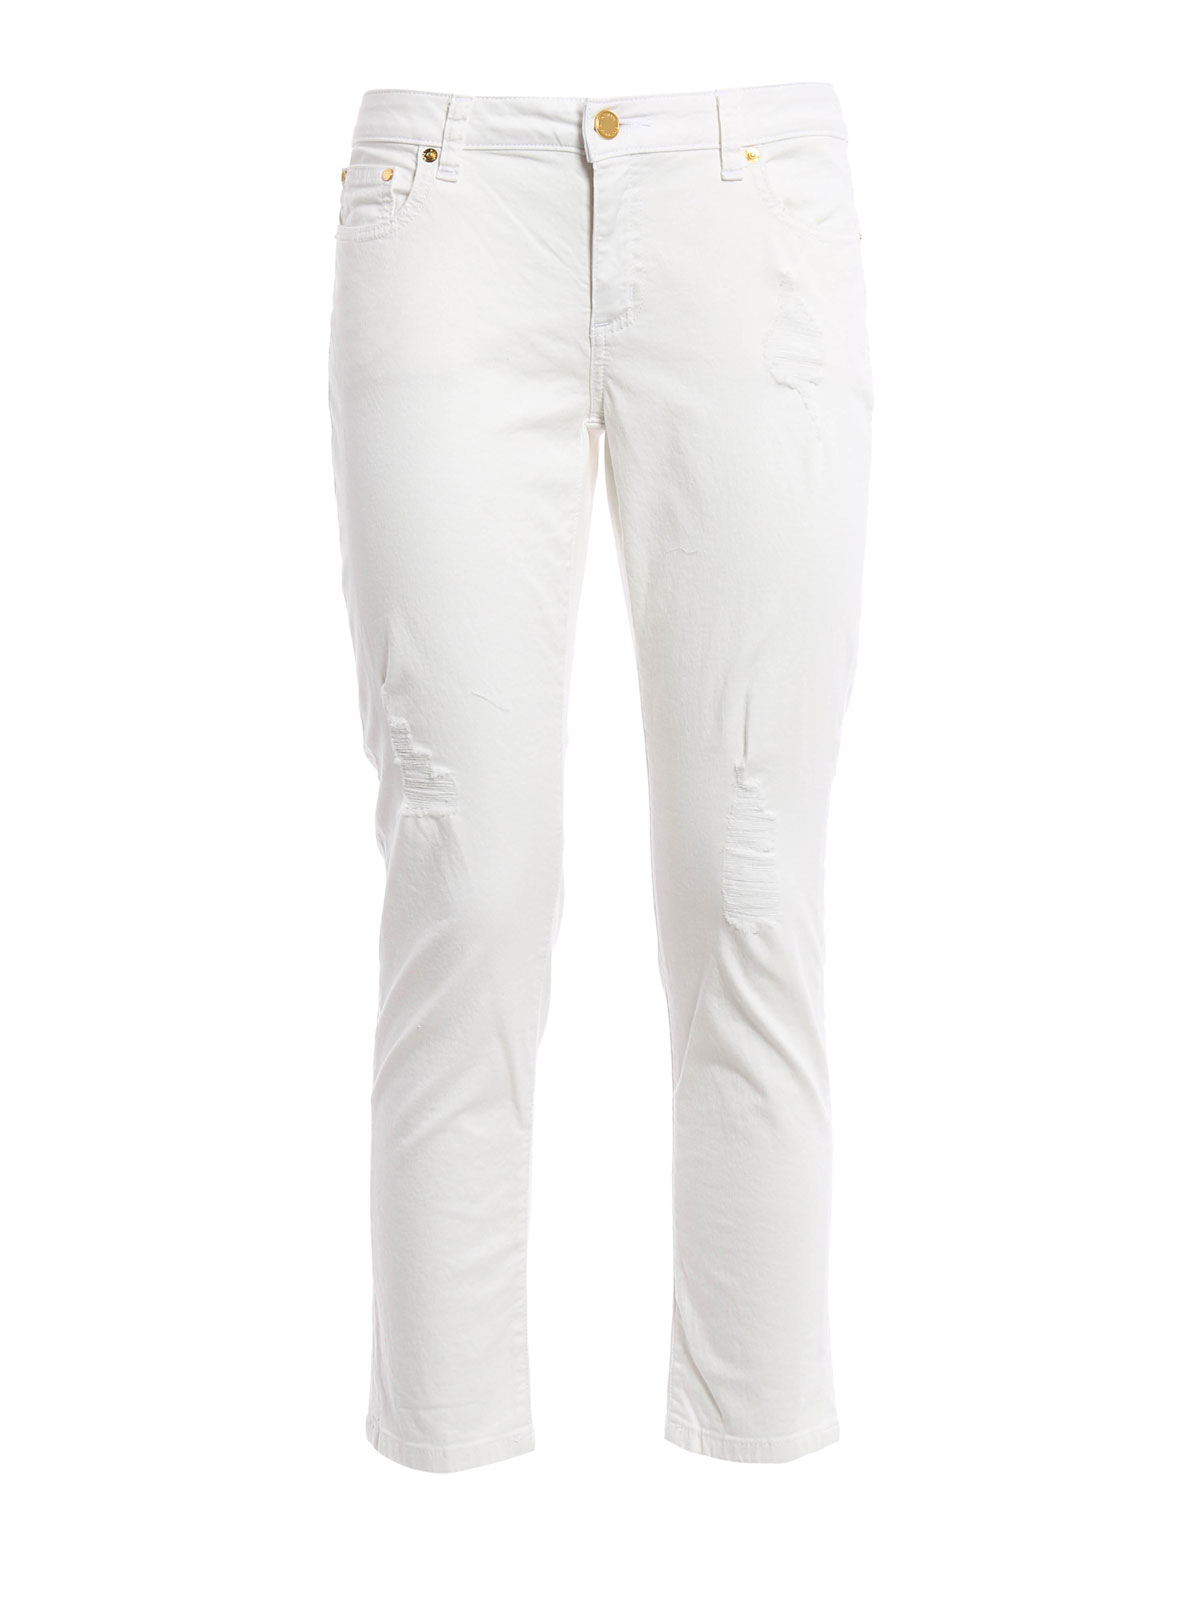 Skinny jeans Michael Kors - Izzy Cropped Skinny jeans - MS69CFH4AM100